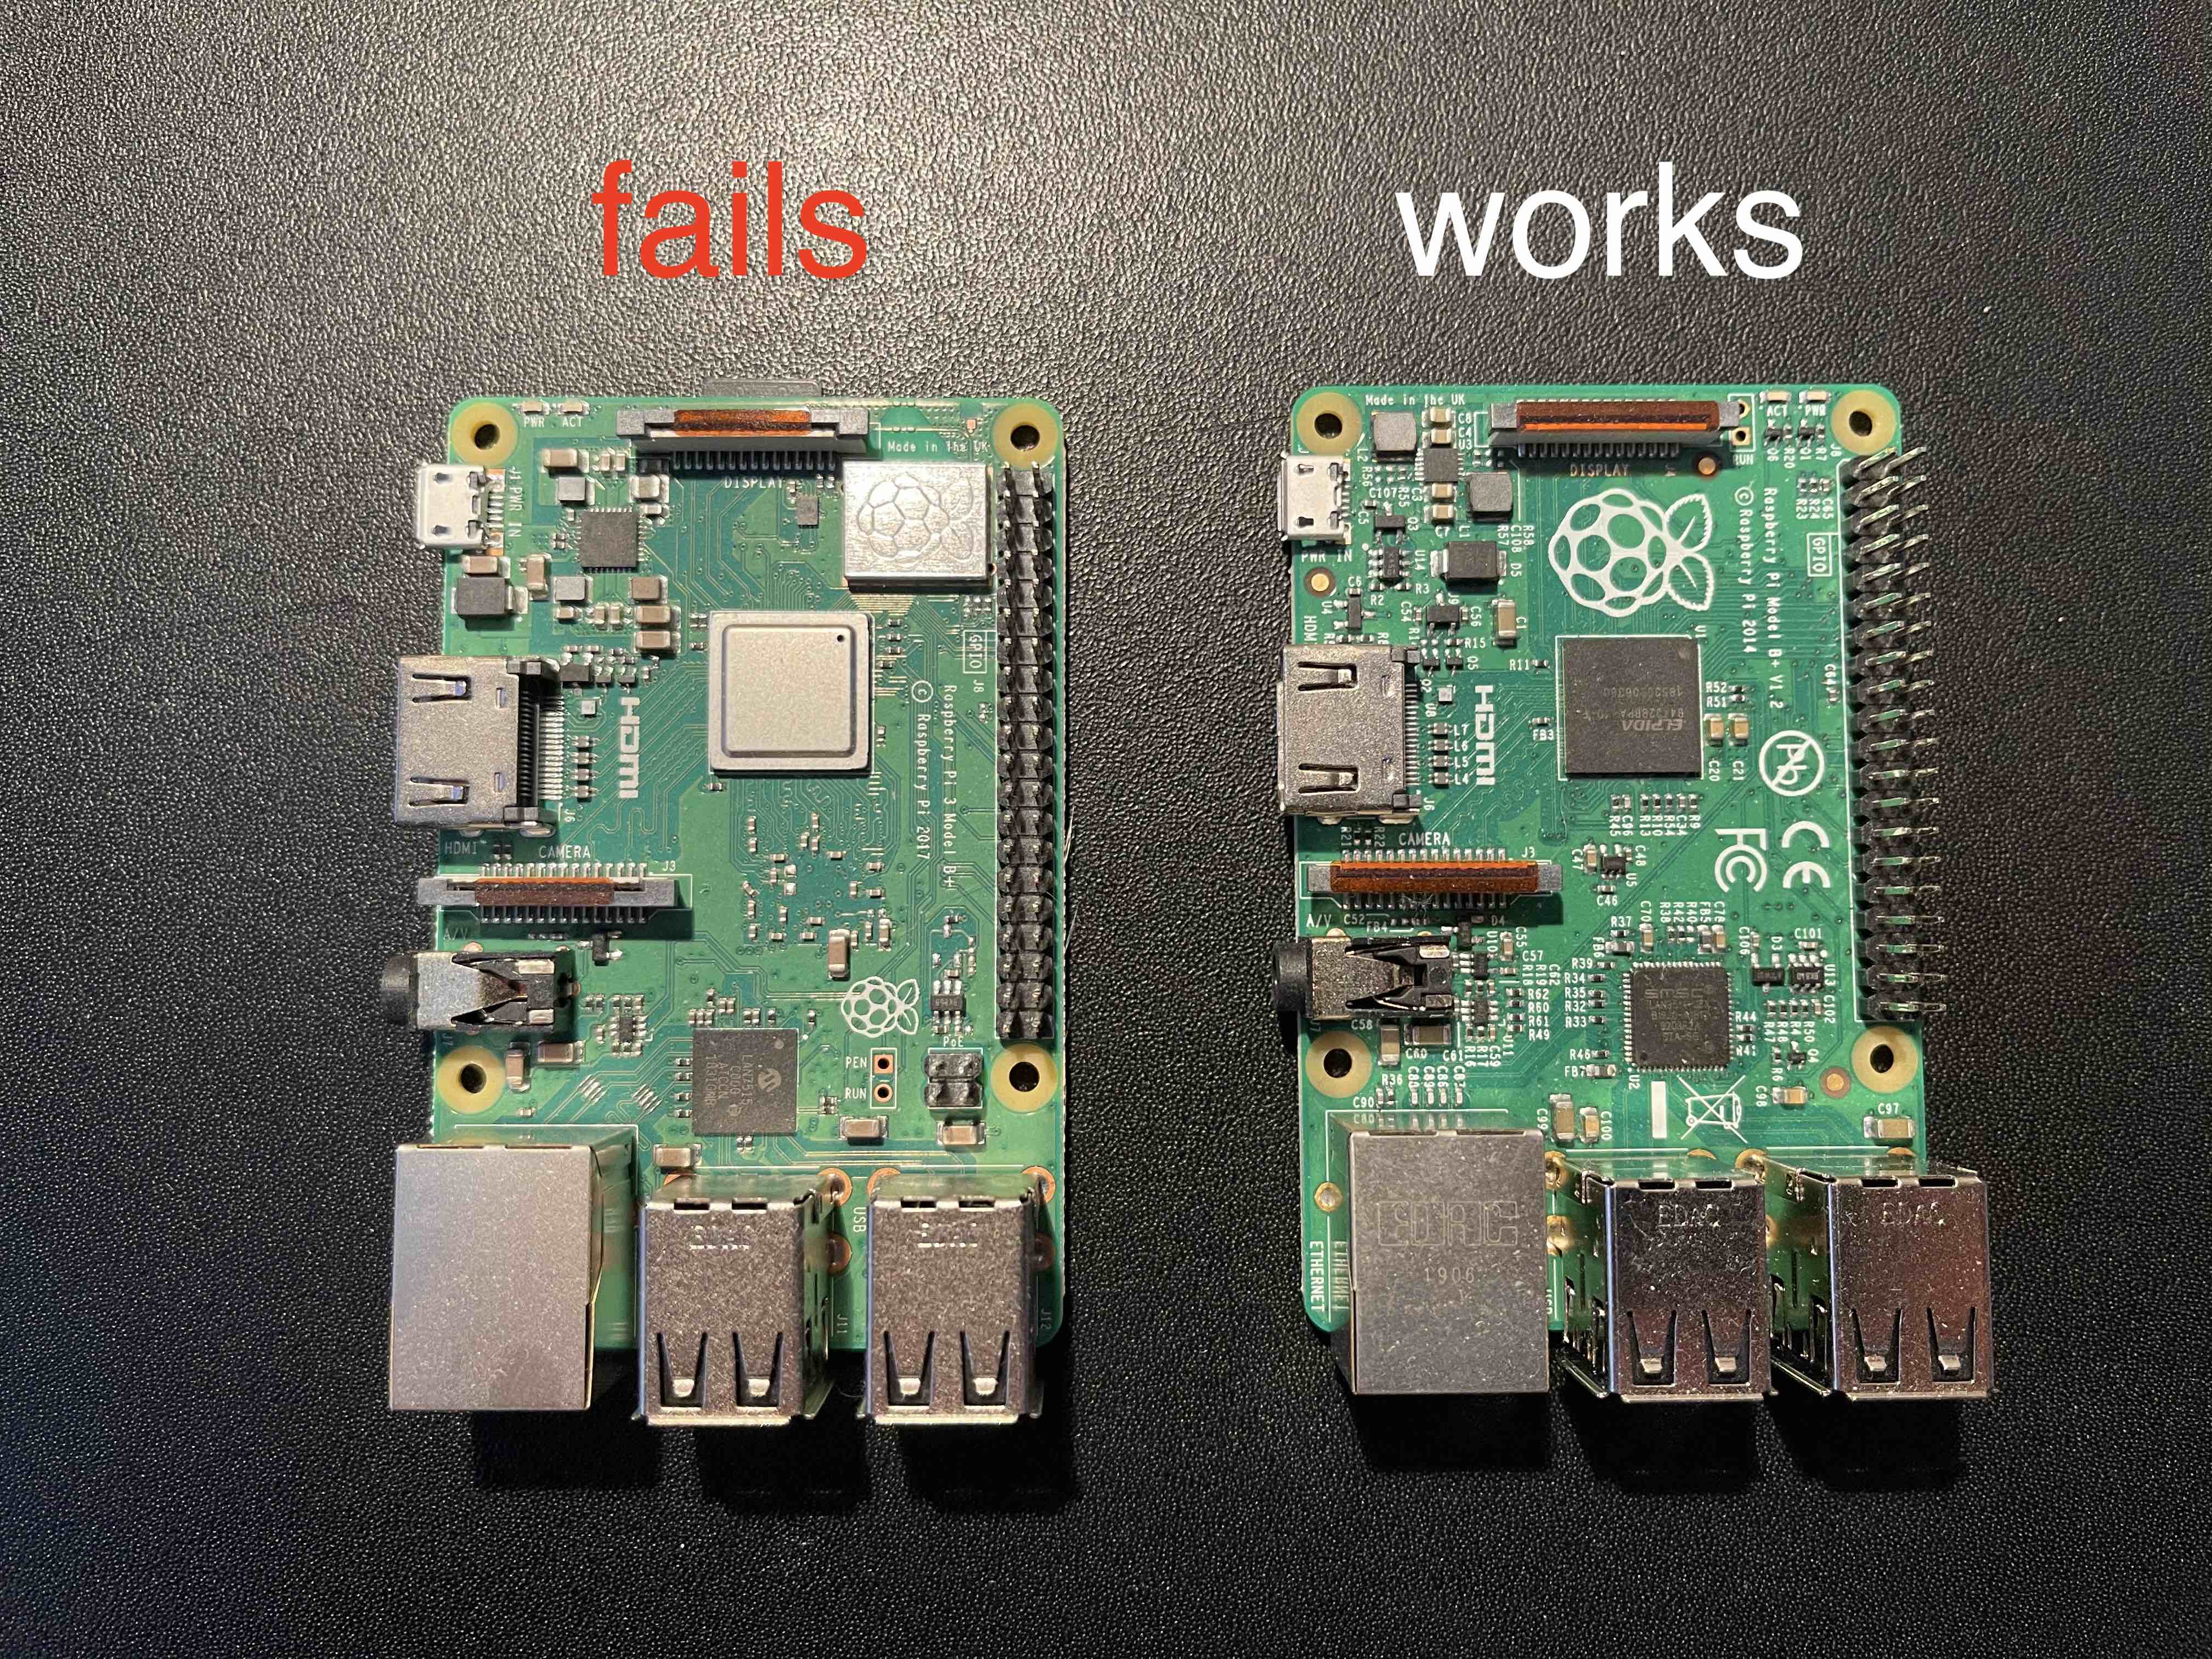 How fast can a Raspberry Pi Zero 2w boot?, by Warrick Walter